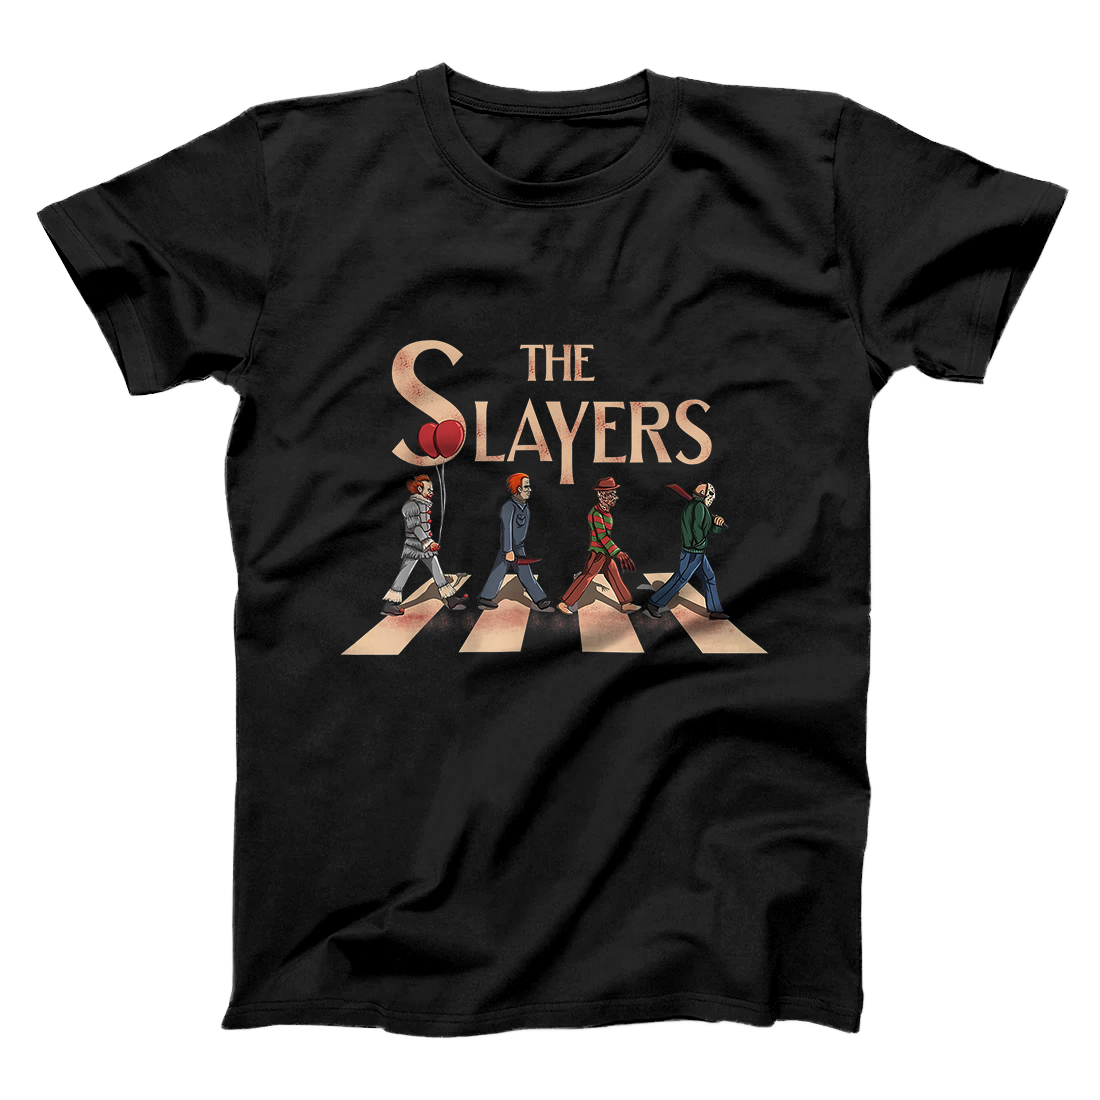 Personalized Halloween Evil Clown Nightmares Slayers Horror Movies Funny T-Shirt